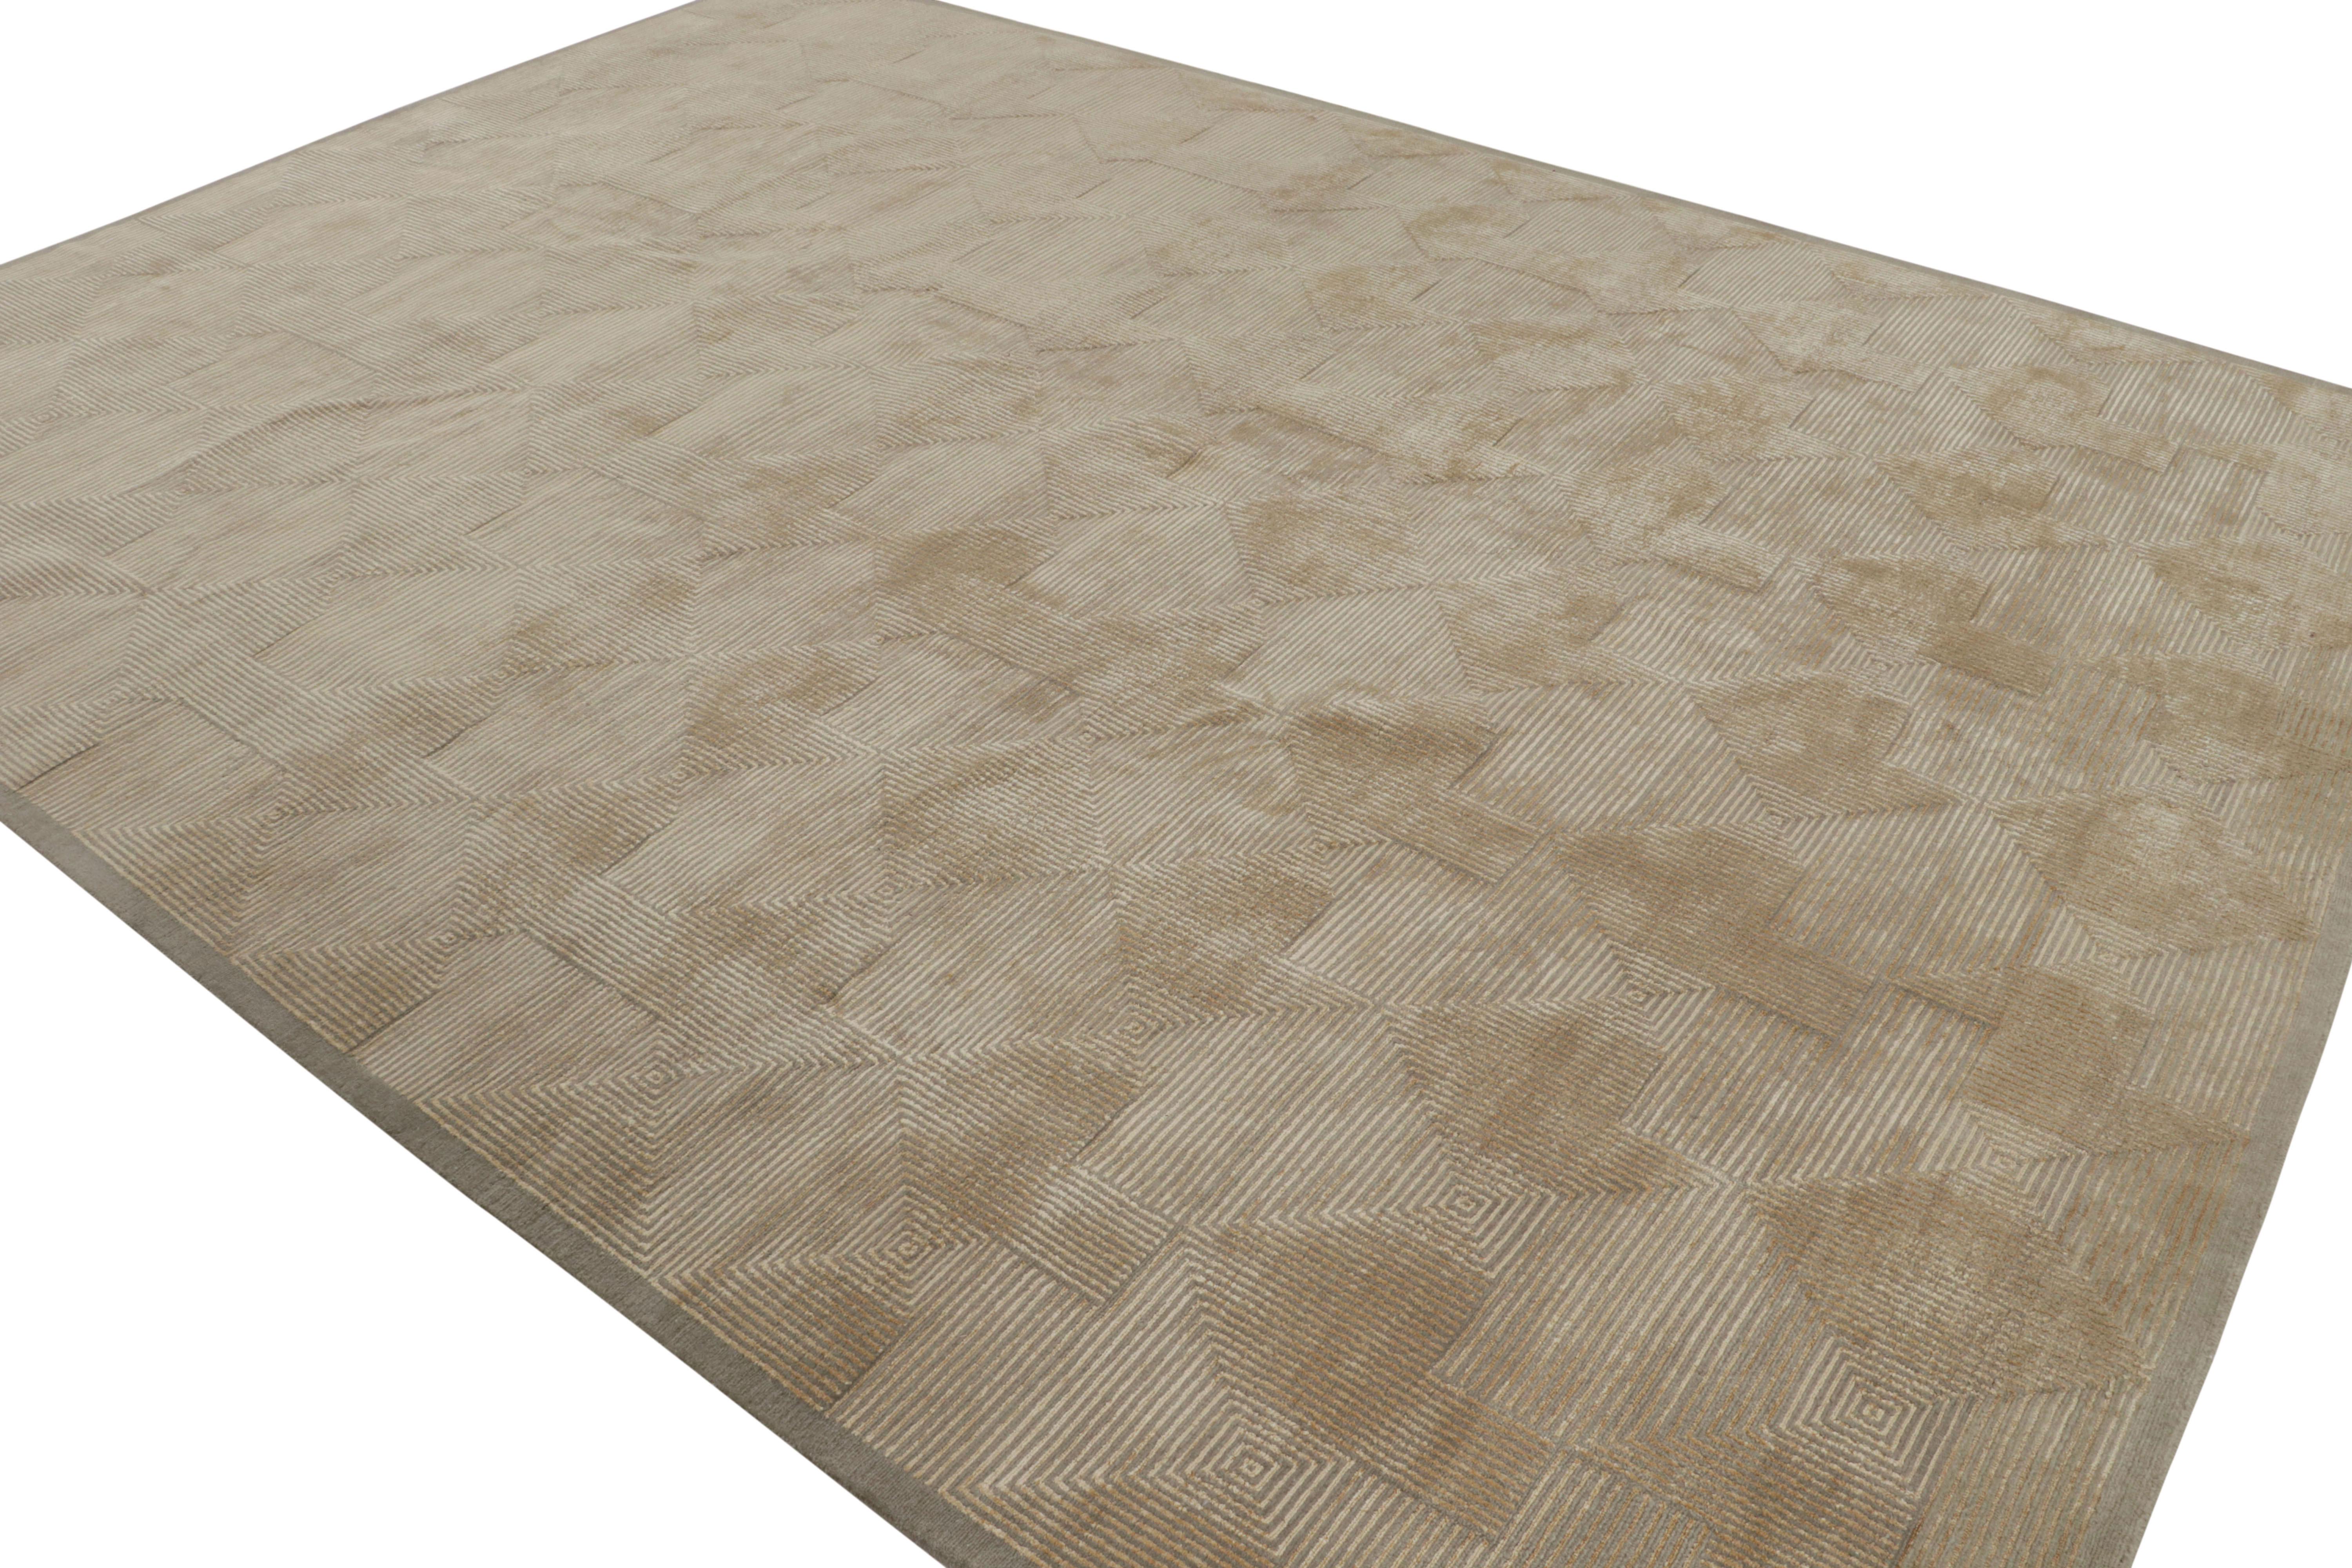 This 9x12 contemporary rug is a new addition to the Art Deco rug collection by Rug & Kilim. Hand-knotted in a luxurious blend of wool and silk, its design is inspired by cubism and similar modernist sensibilities, 

On the Design: 

Beige-brown,